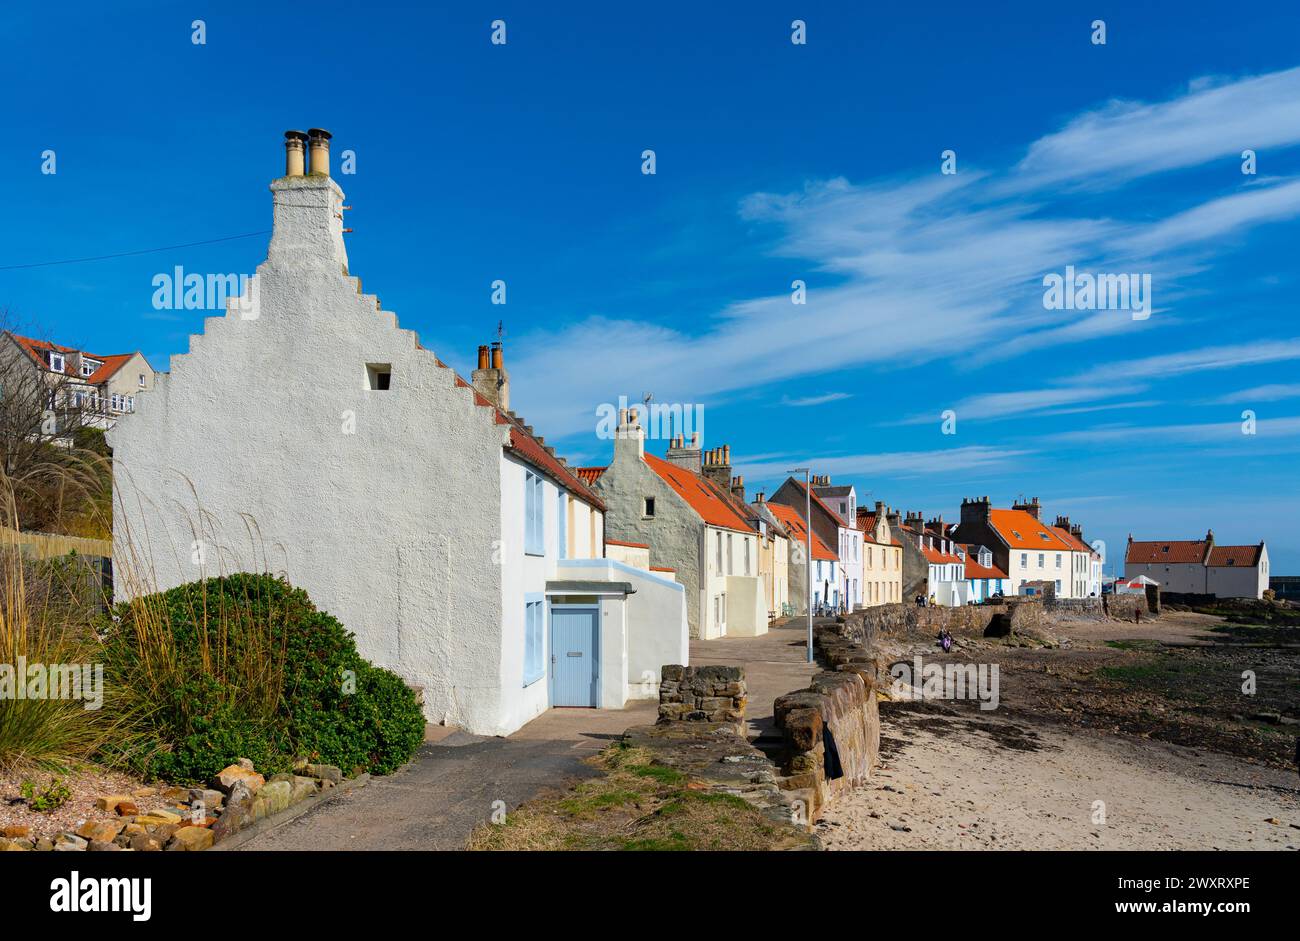 View of old houses and narrow Mid Shore street in Pittenweem, East Neuk of Fife, Scotland, UK Stock Photo